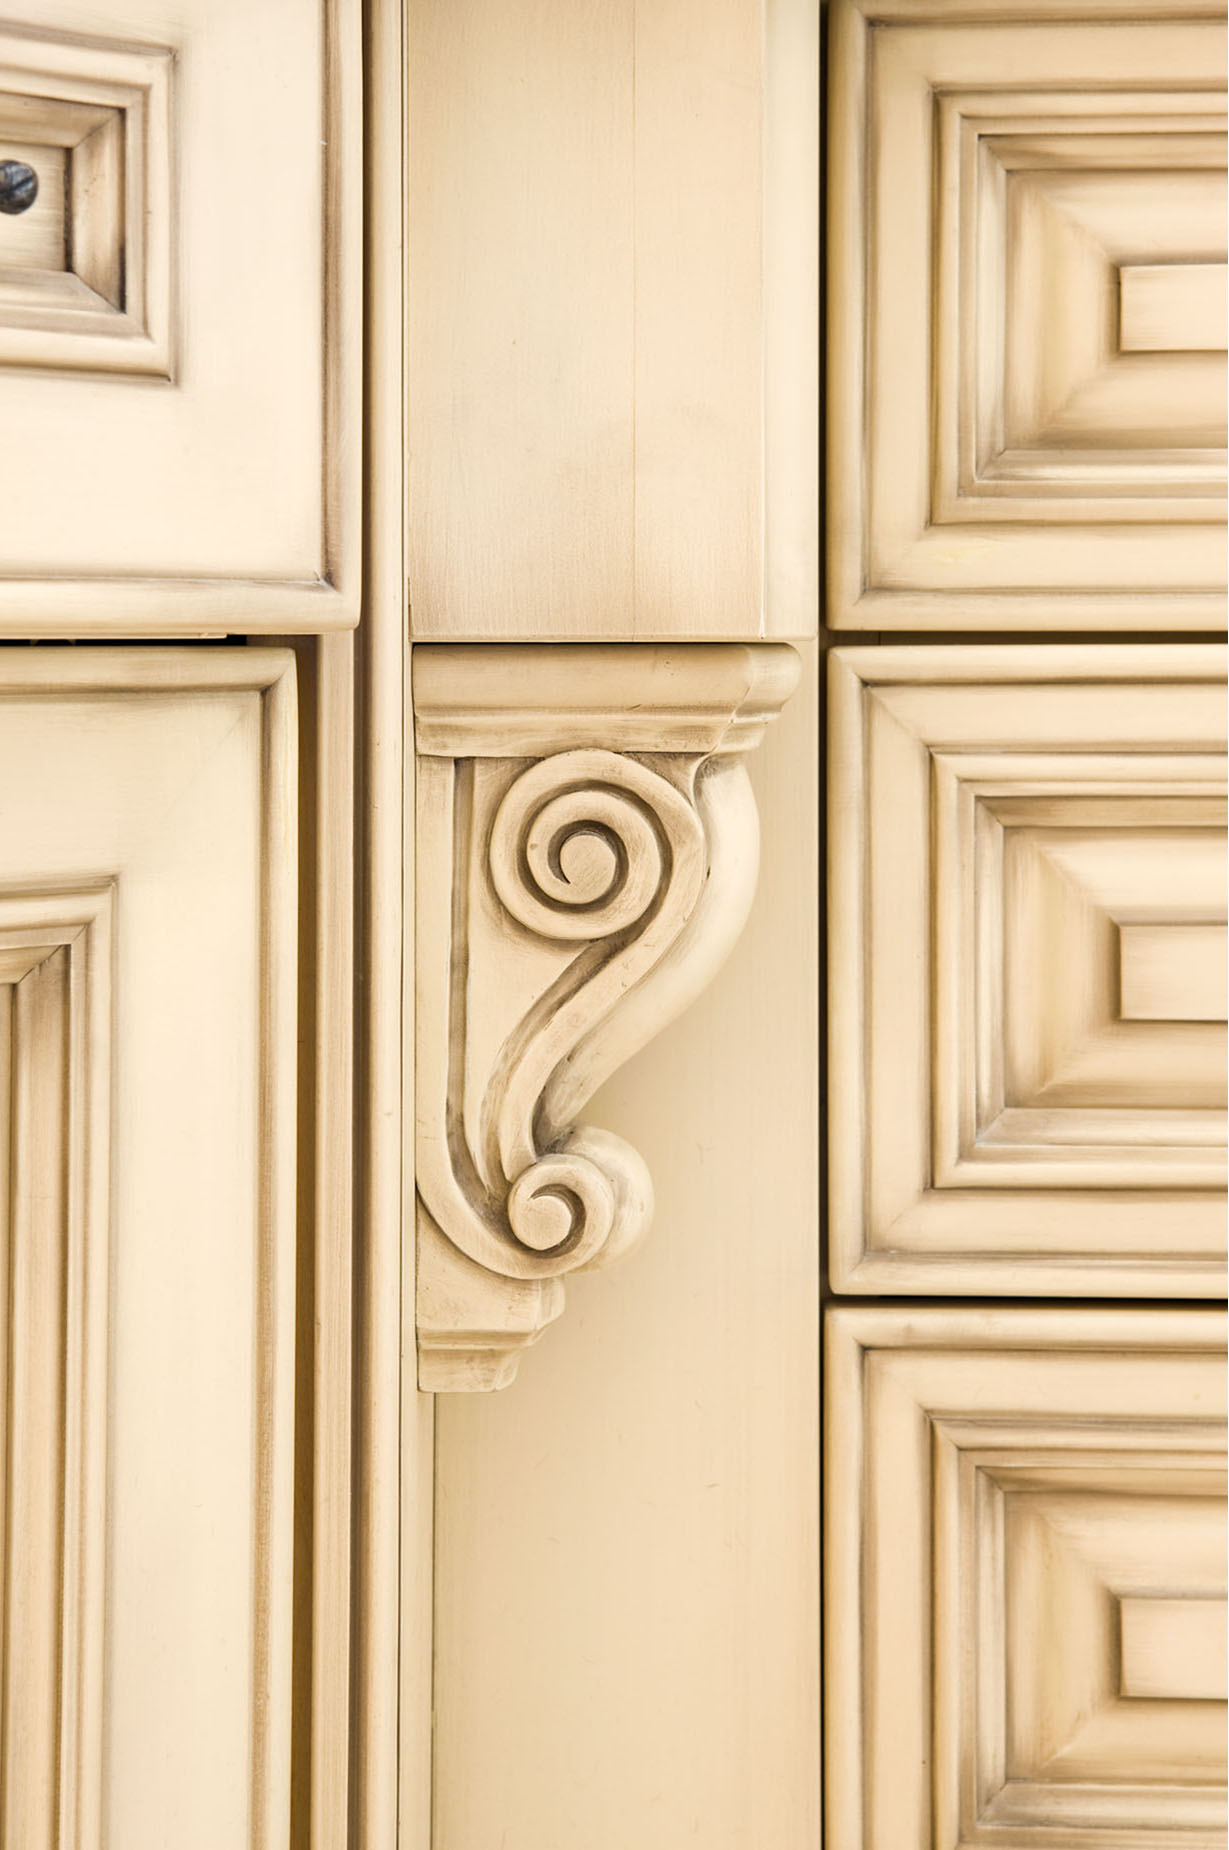 Hand carved details on the corbels jumps to life when the glazing finds its way into the deeper recesses. The same effect is achieved on the ornate mitred doors and drawer fronts. The result is a look of antique furniture as opposed to kitchen cabinets.